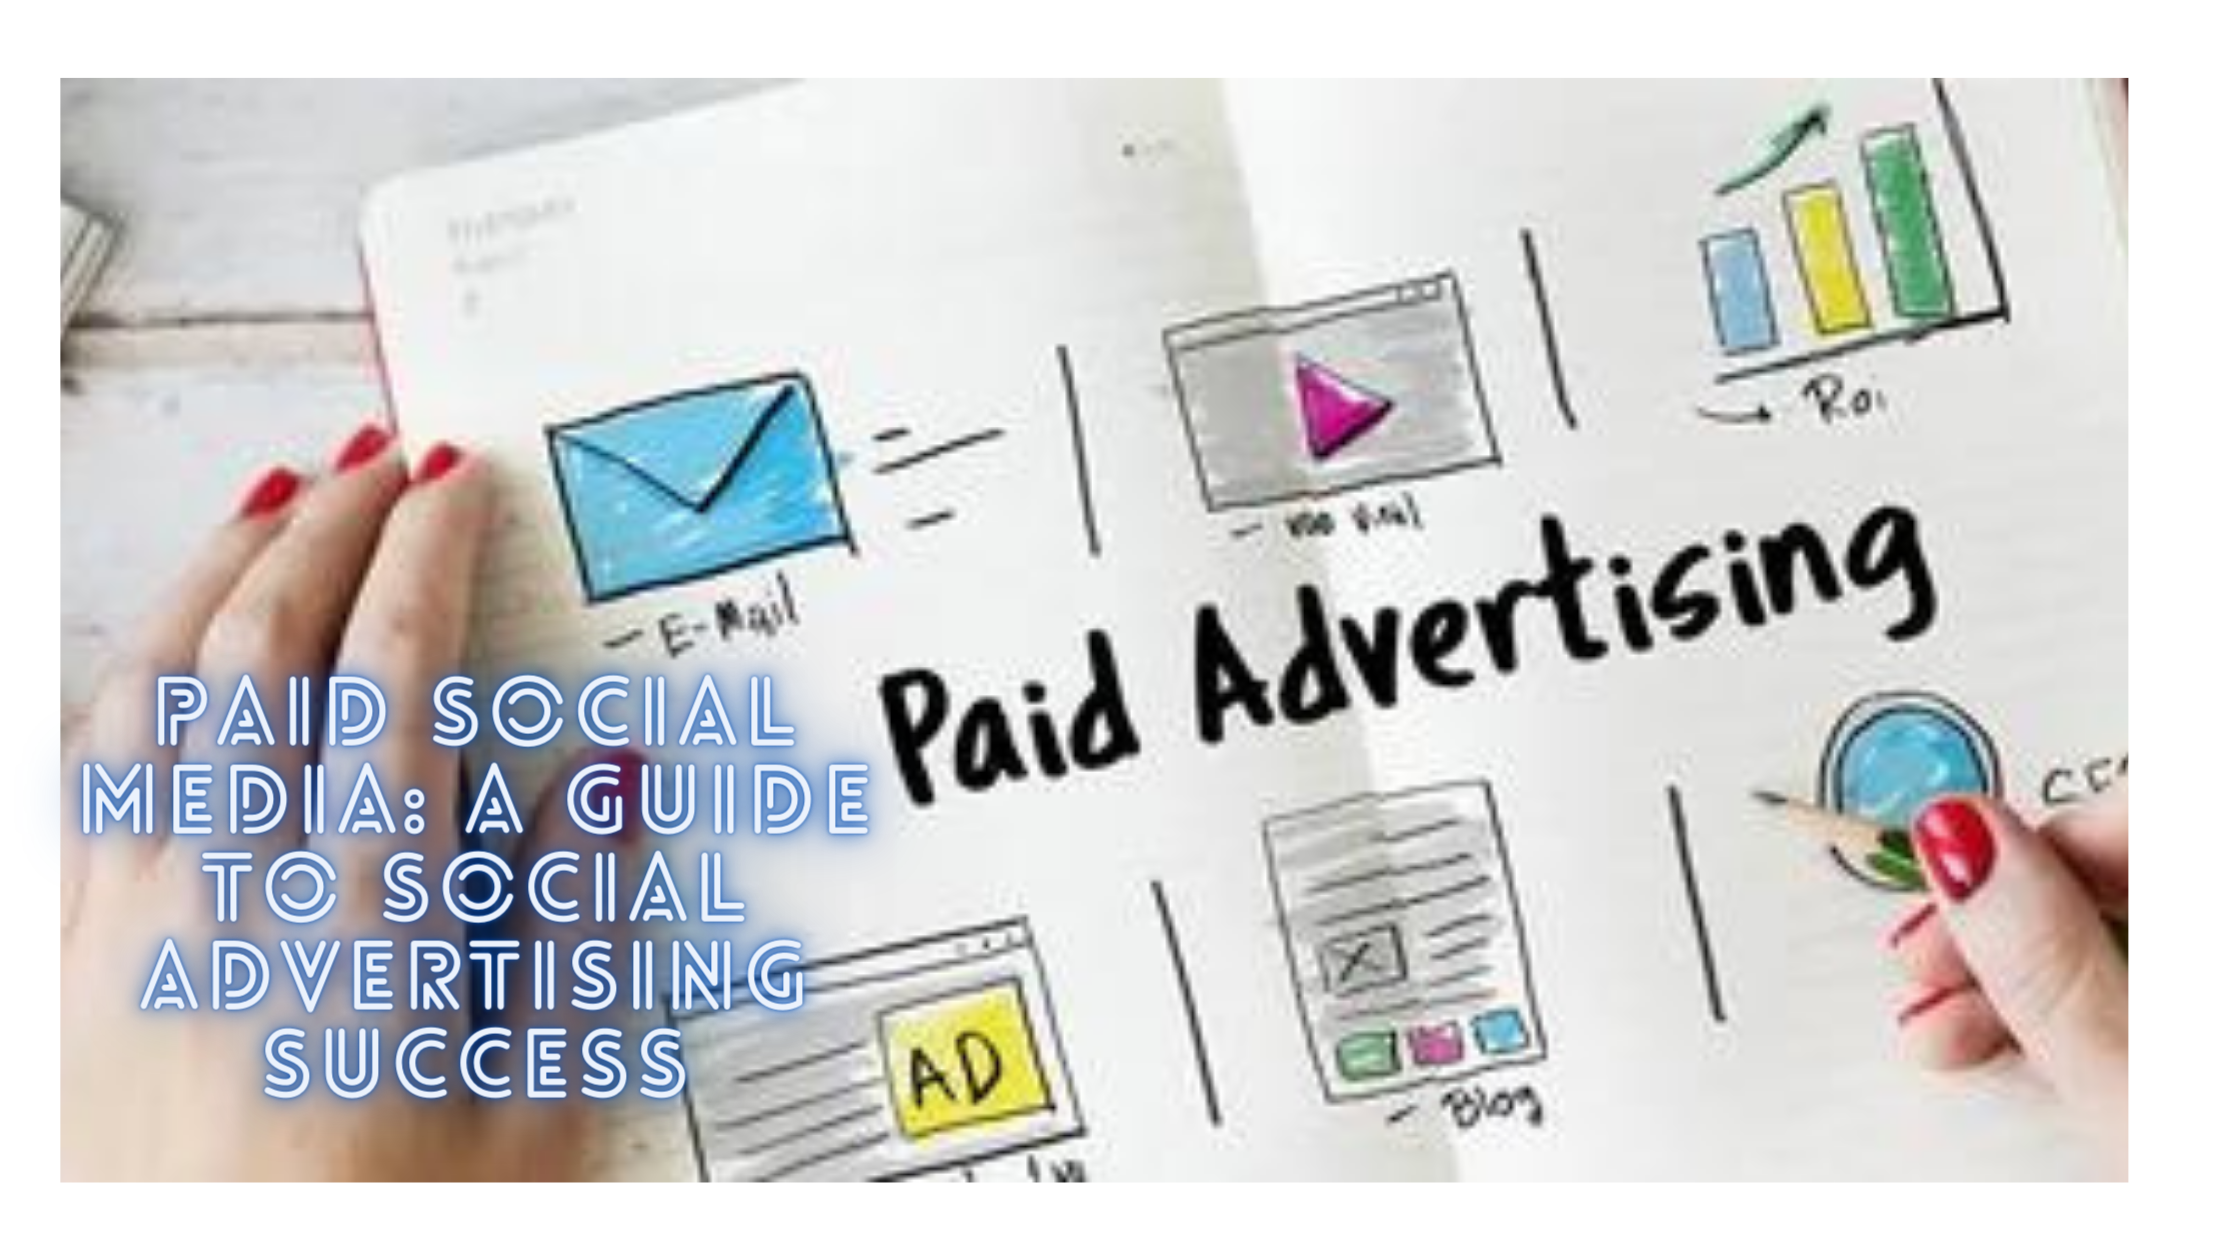 Paid Social Media: A Guide to Social Advertising Success